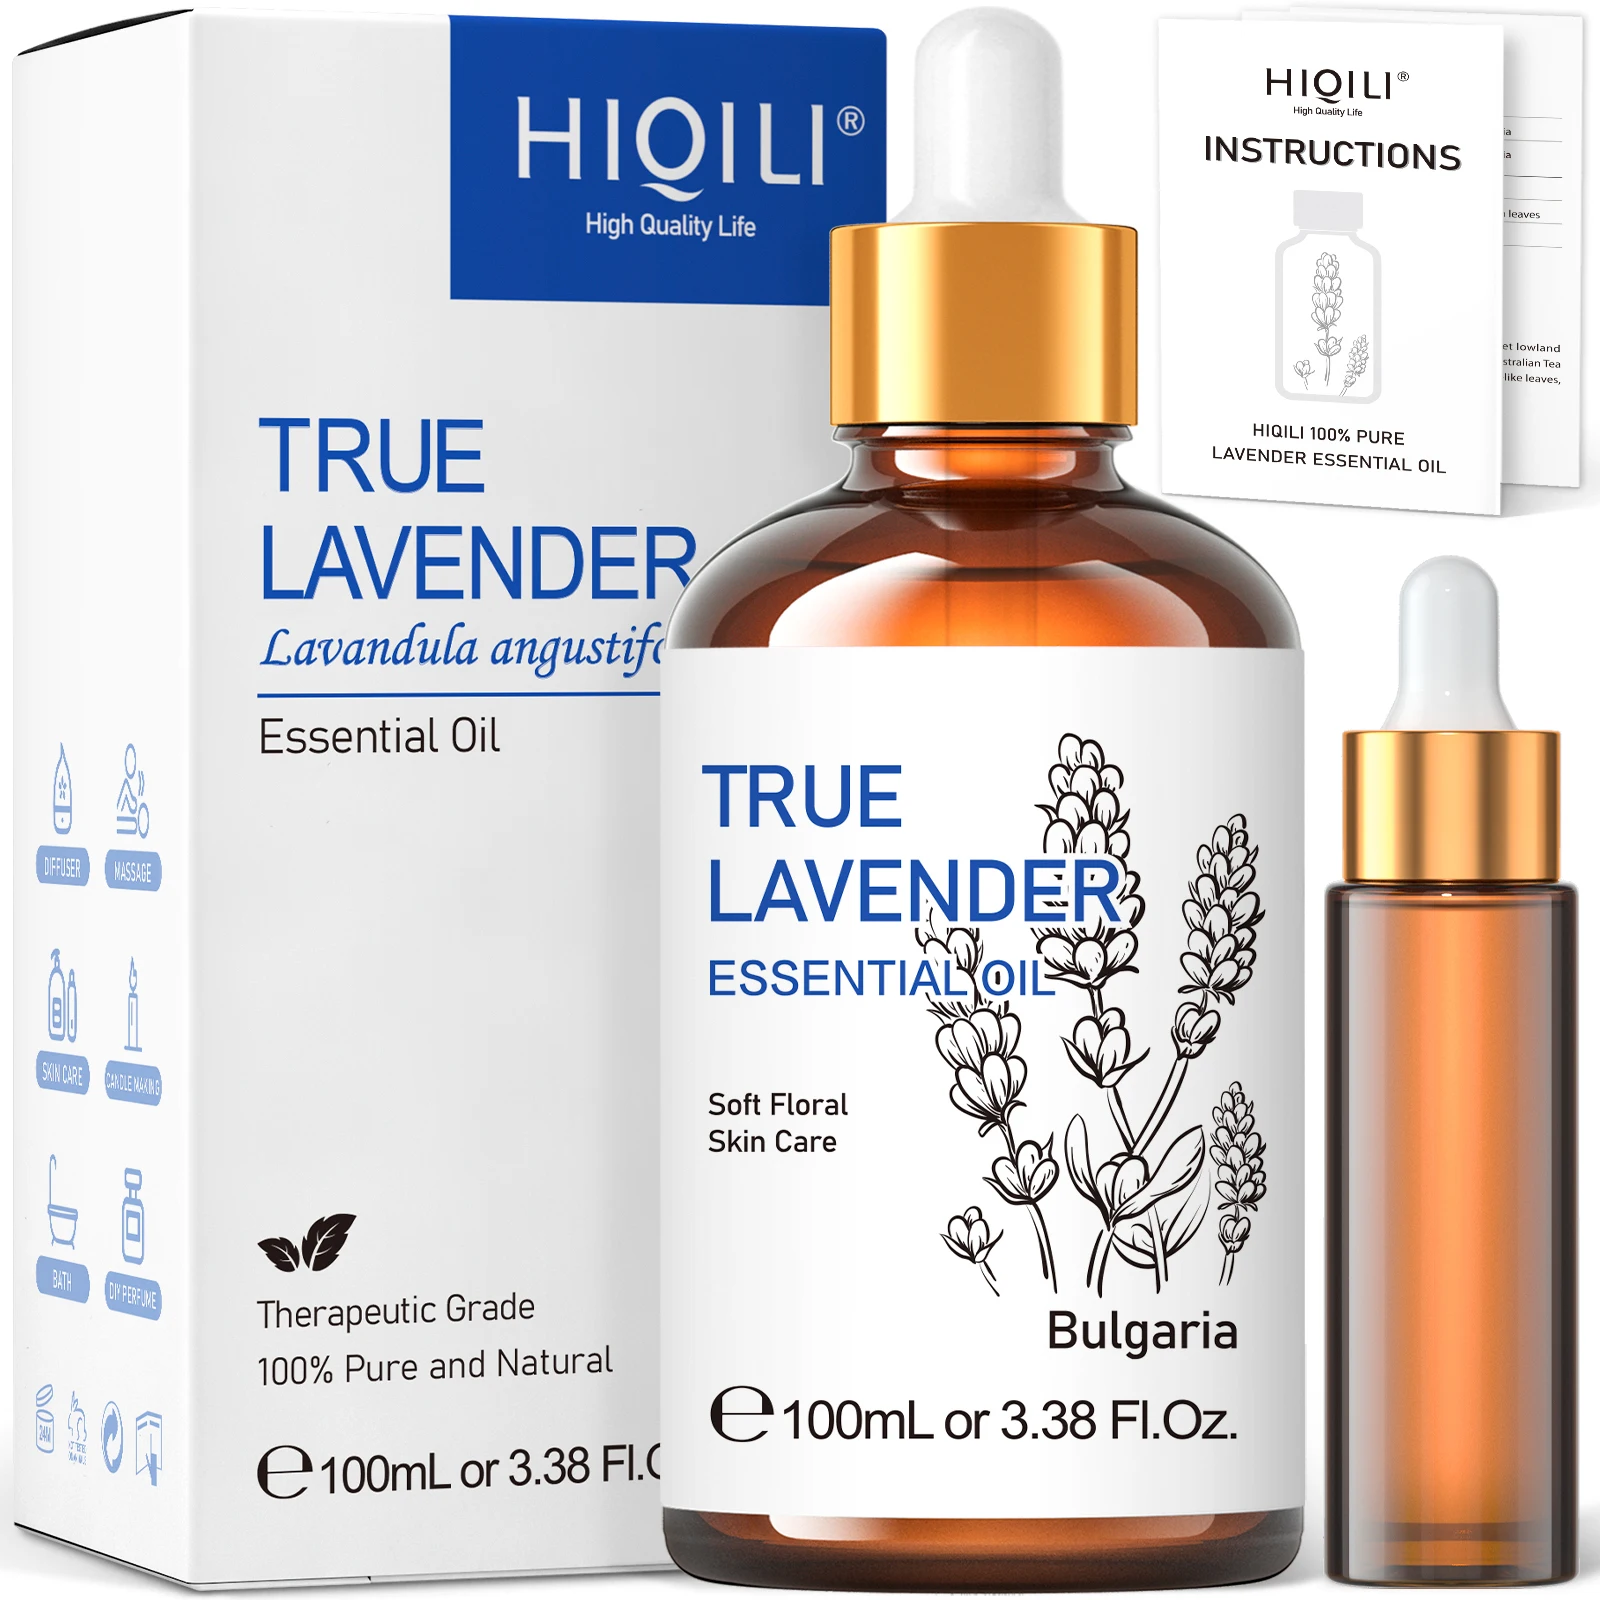 HIQILI 100ML True Lavender Essential Oils for Diffuser Humidifier Massage Aromatherapy Pure Natural Aroma Oil for Candle Making